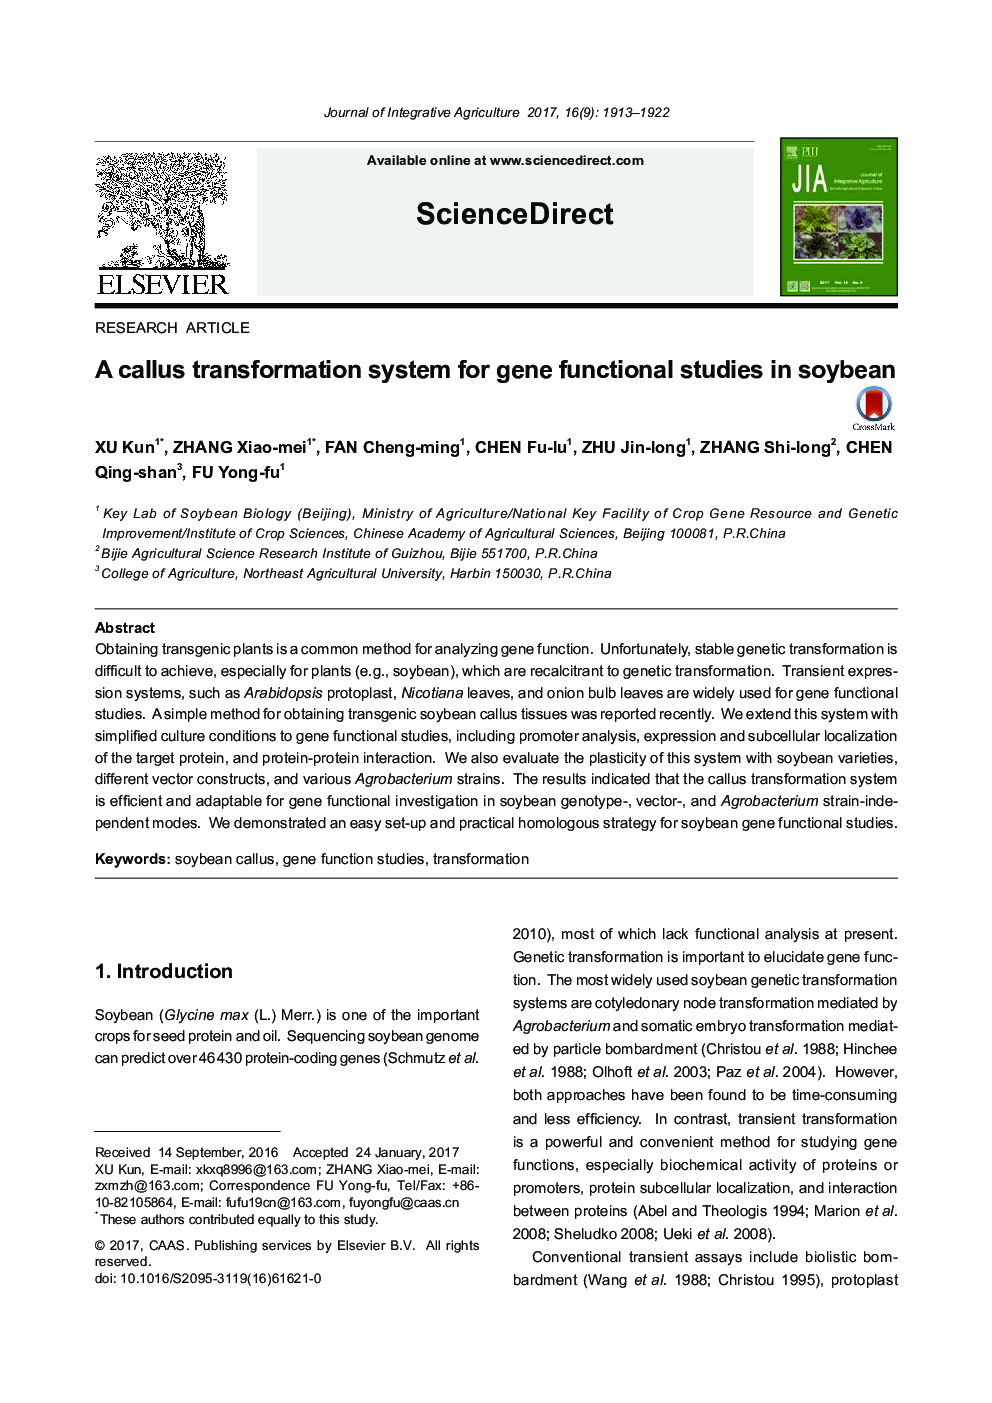 A callus transformation system for gene functional studies in soybean